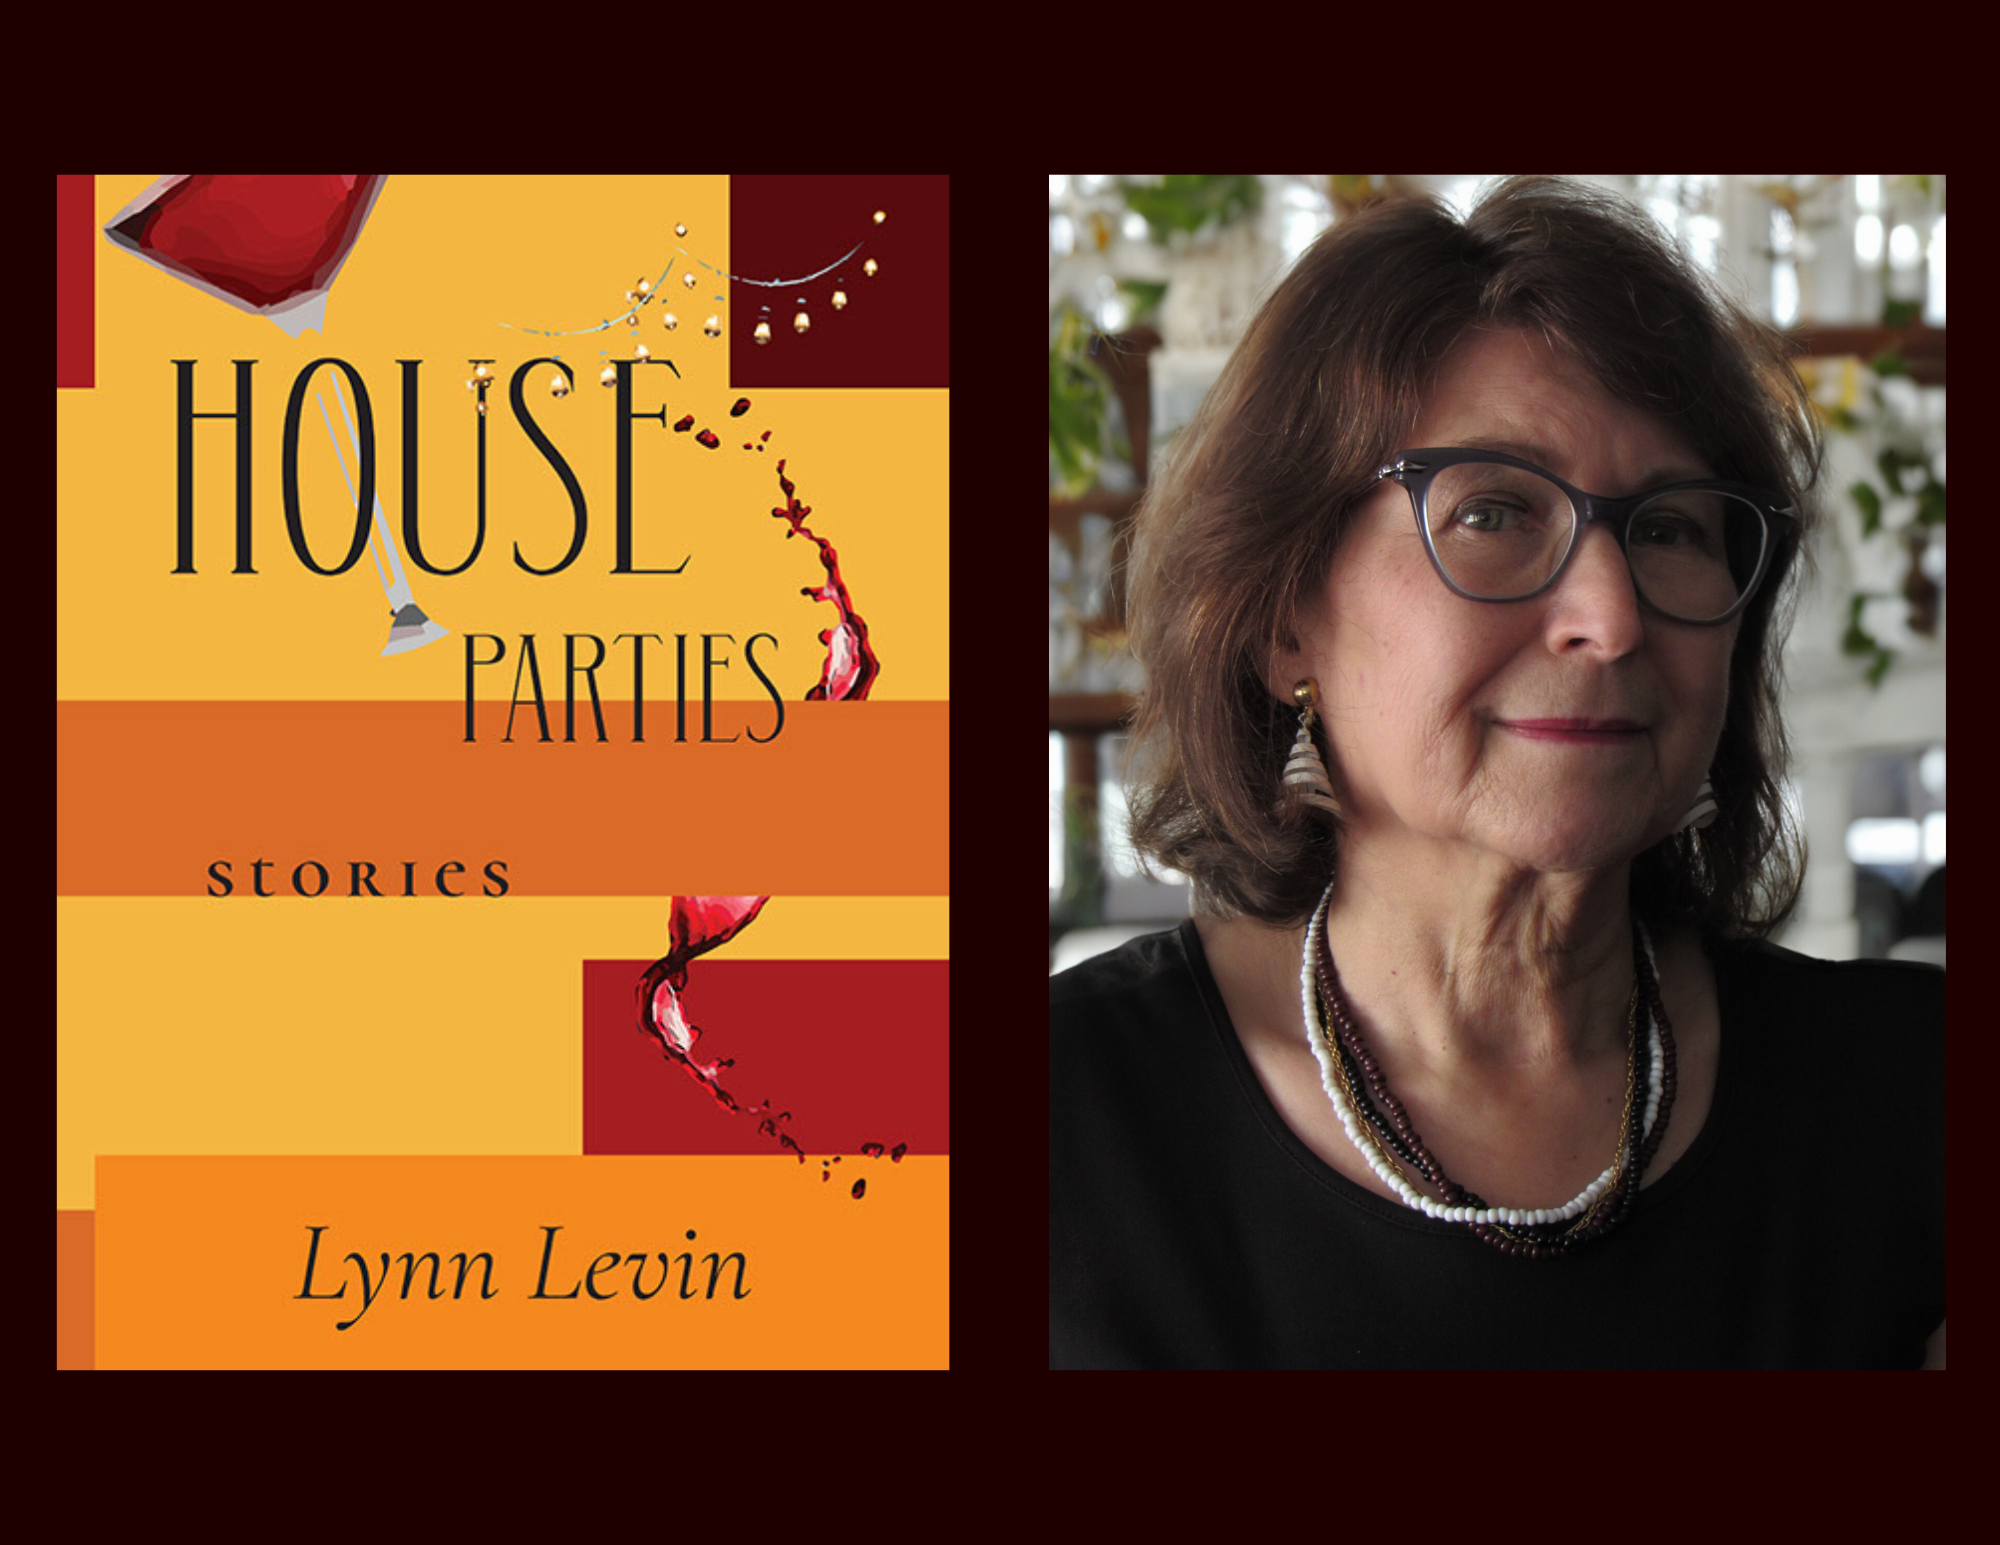 Lynn Levin Discusses Her Story Collection, House Parties